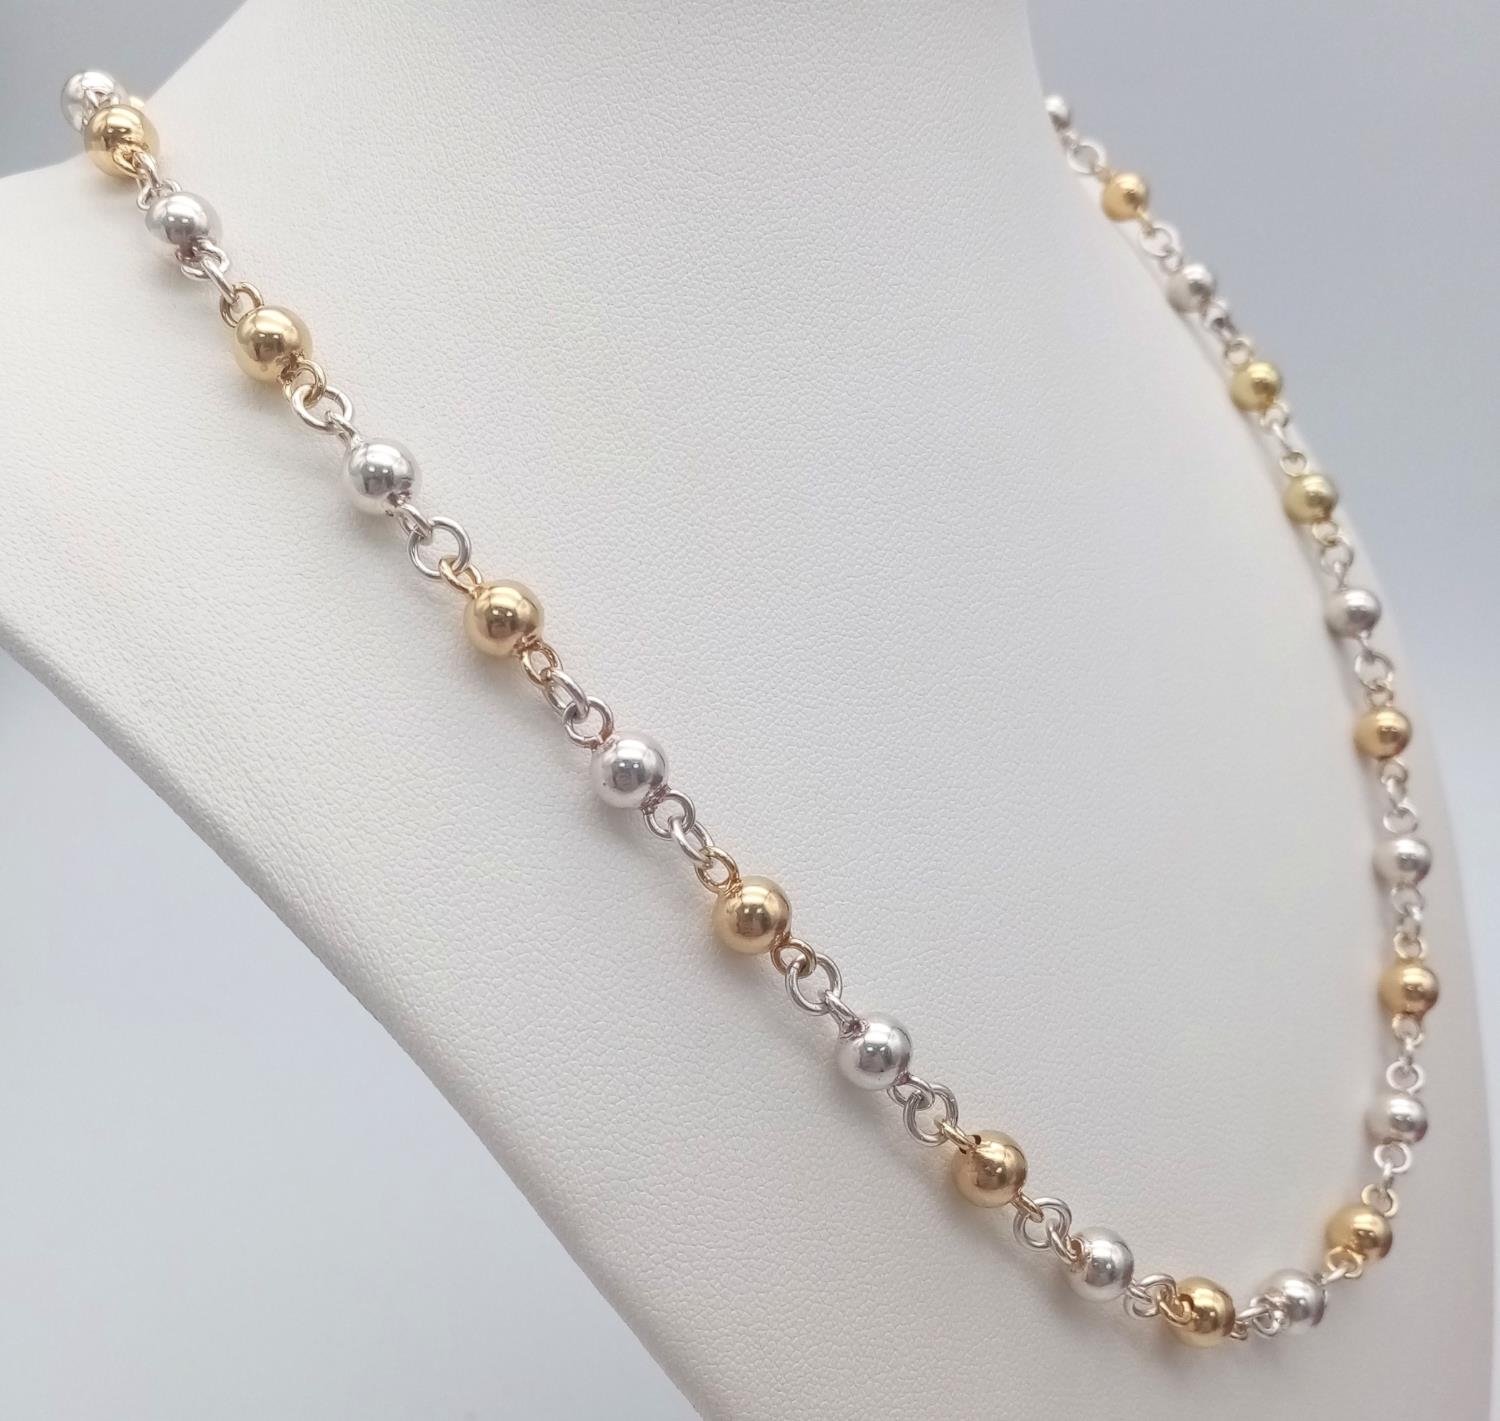 A 925 Silver and Gilded Bauble Necklace - 44cm. 19.5g - Image 2 of 4